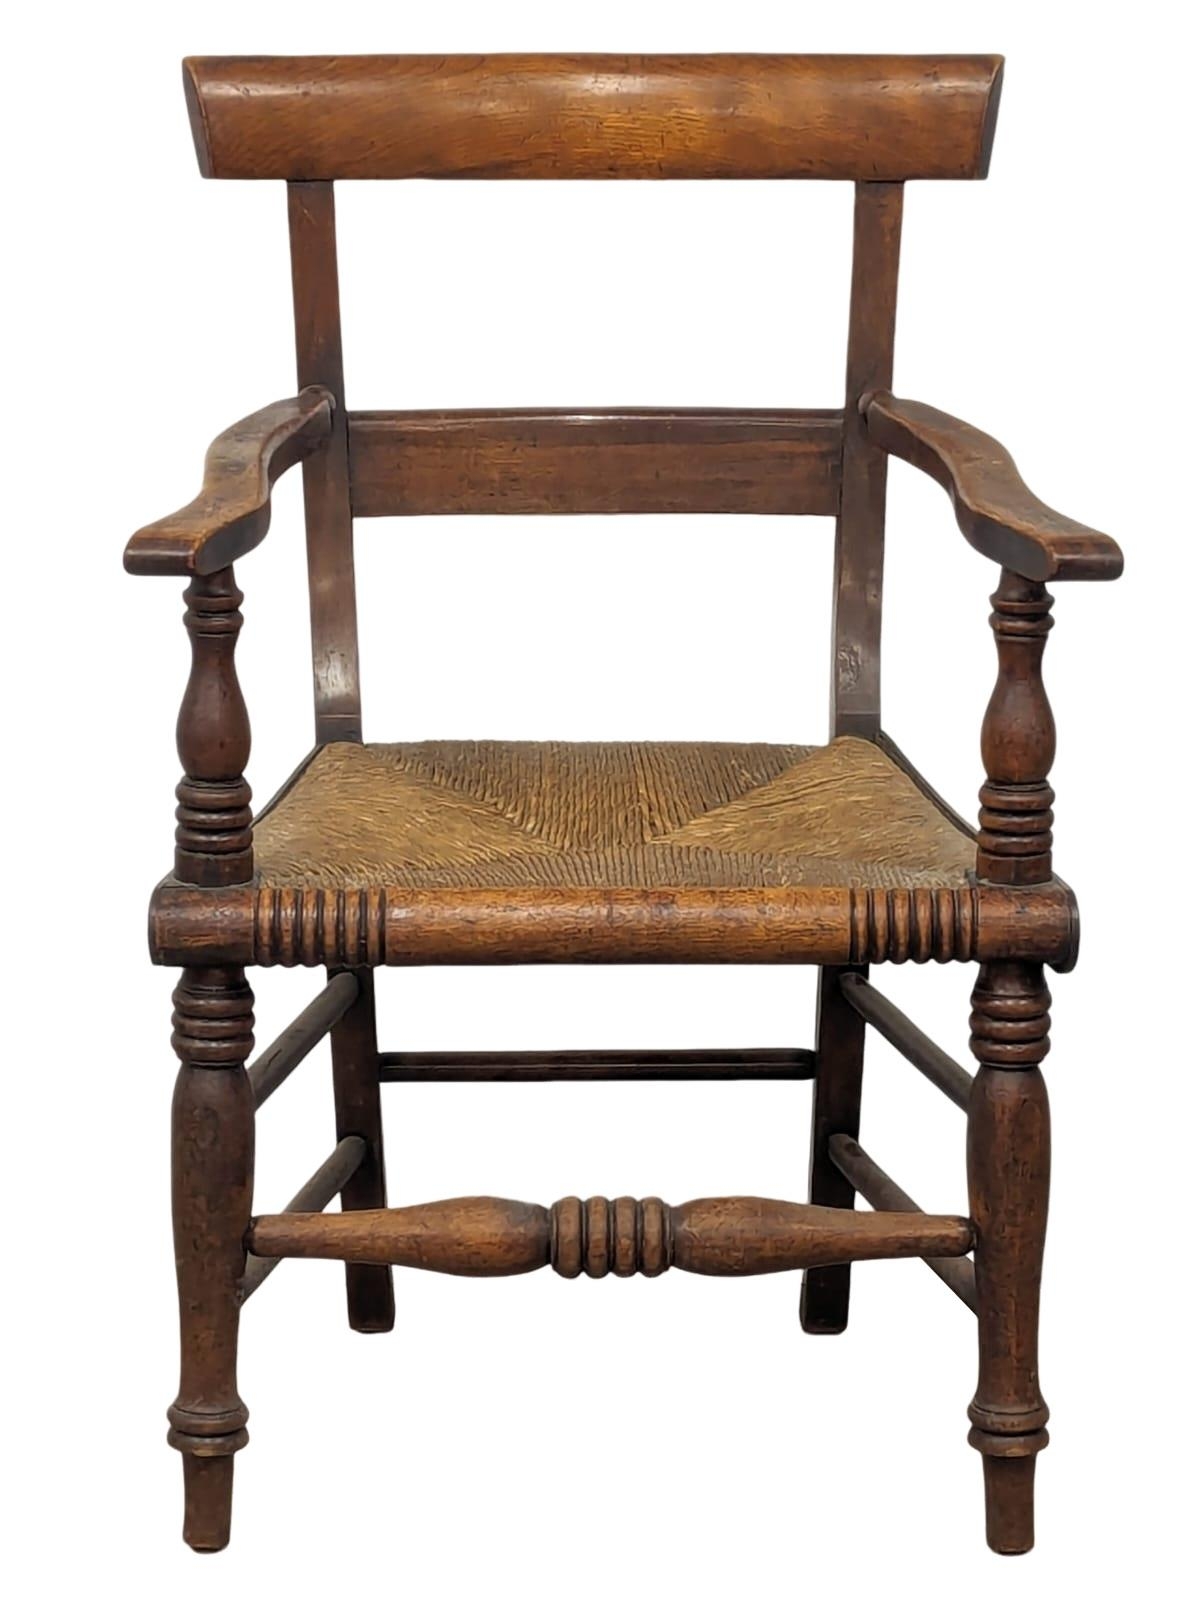 A mid 19th Century Scottish country house armchair with rush seat